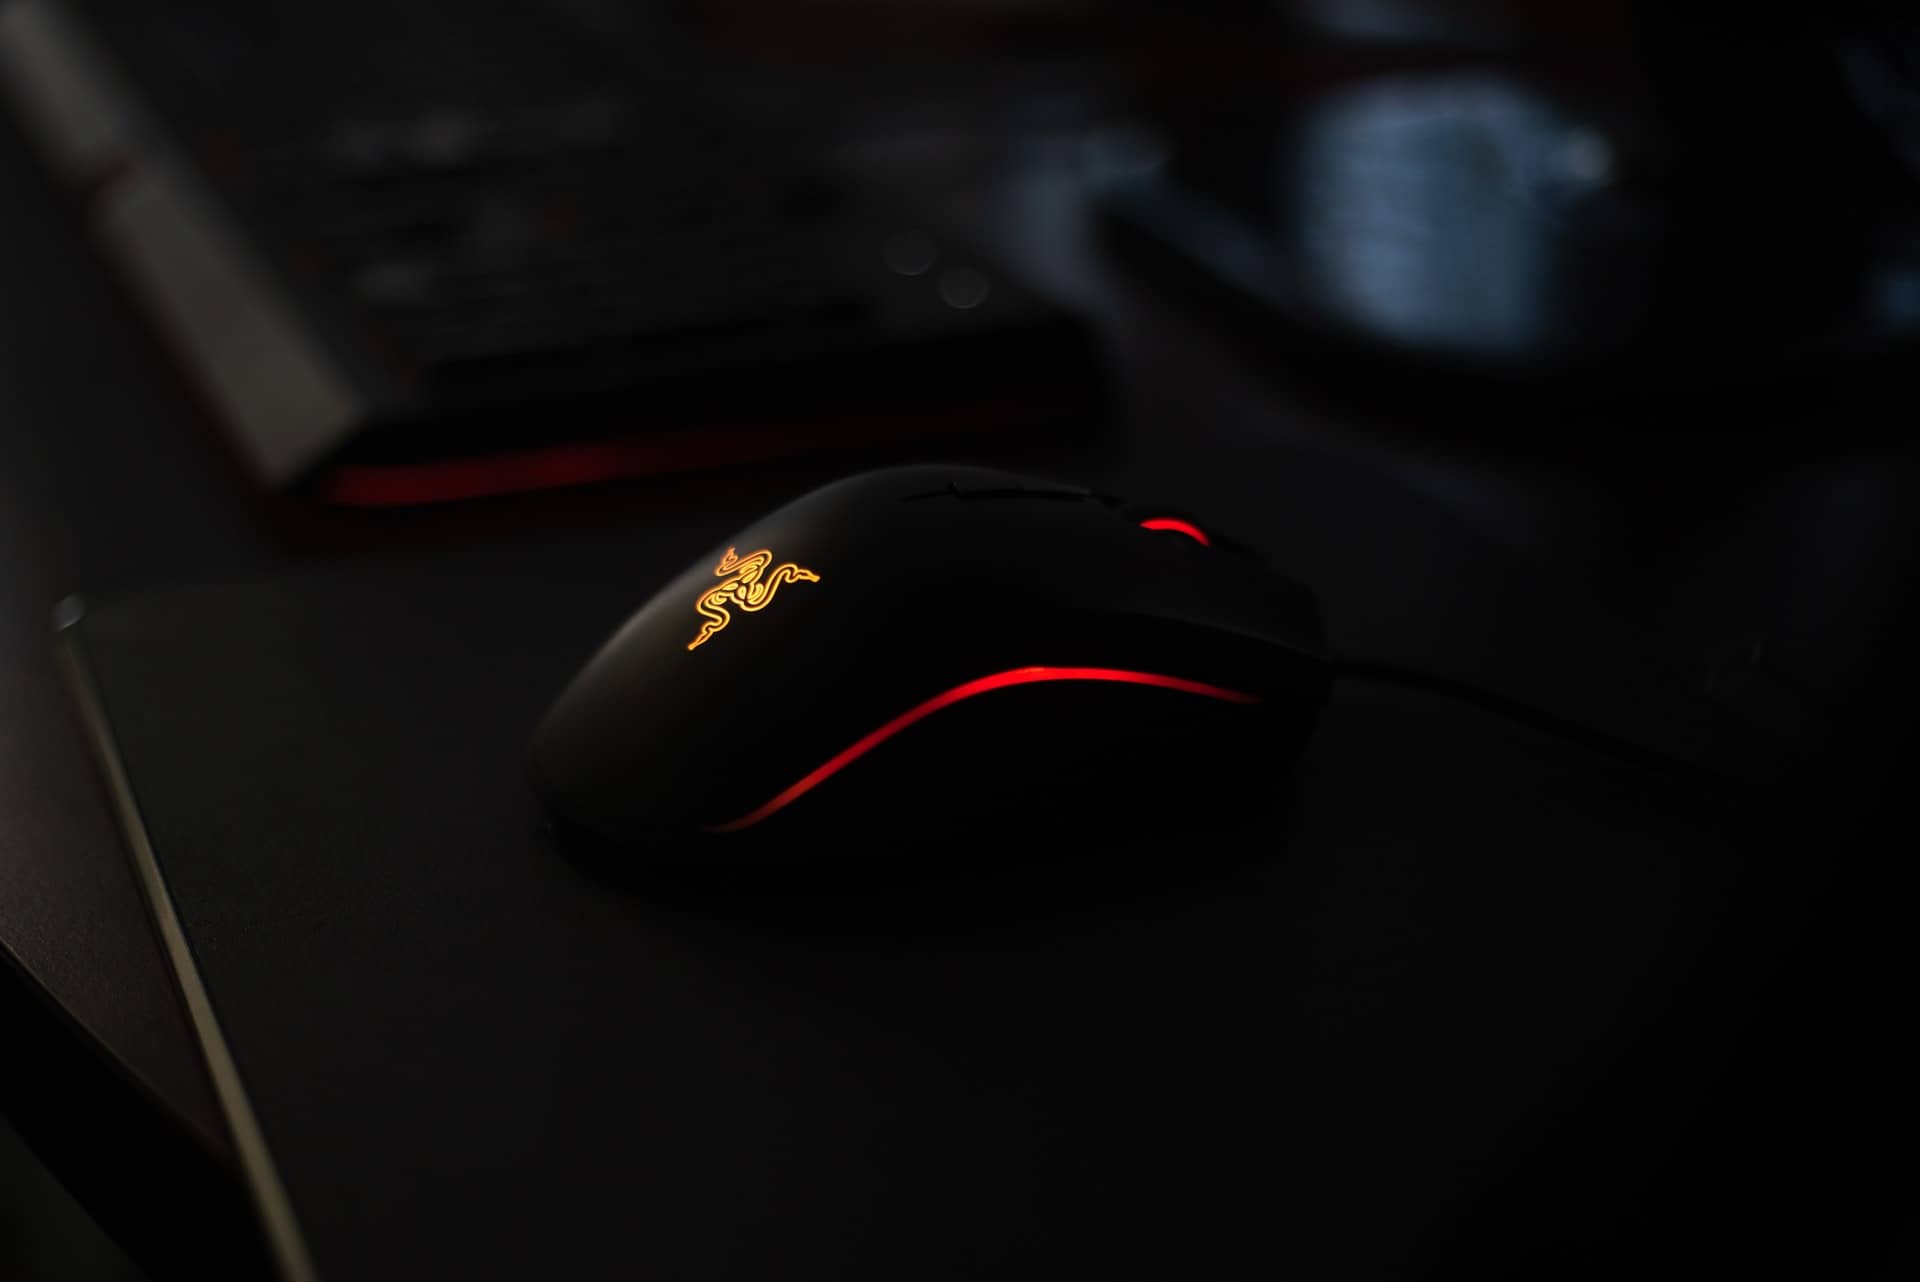 Razer DeathAdder V2 Pro Wireless Gaming Mouse Review